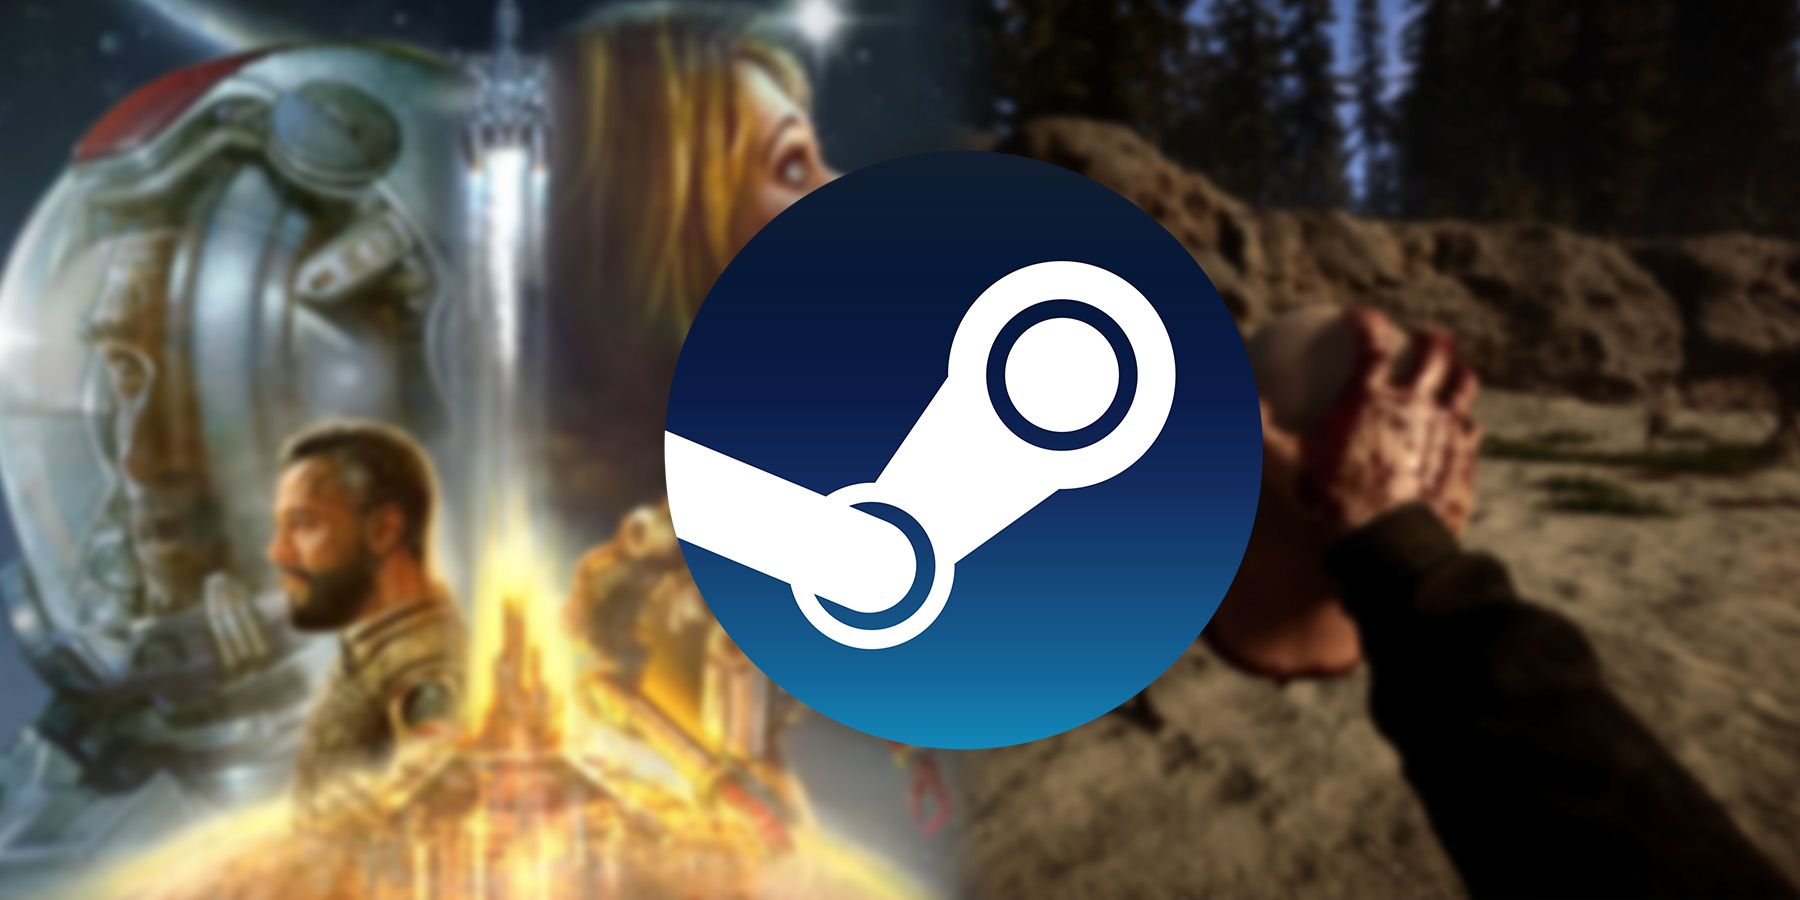 Hades 2 is now the most-wishlisted game on Steam - Xfire